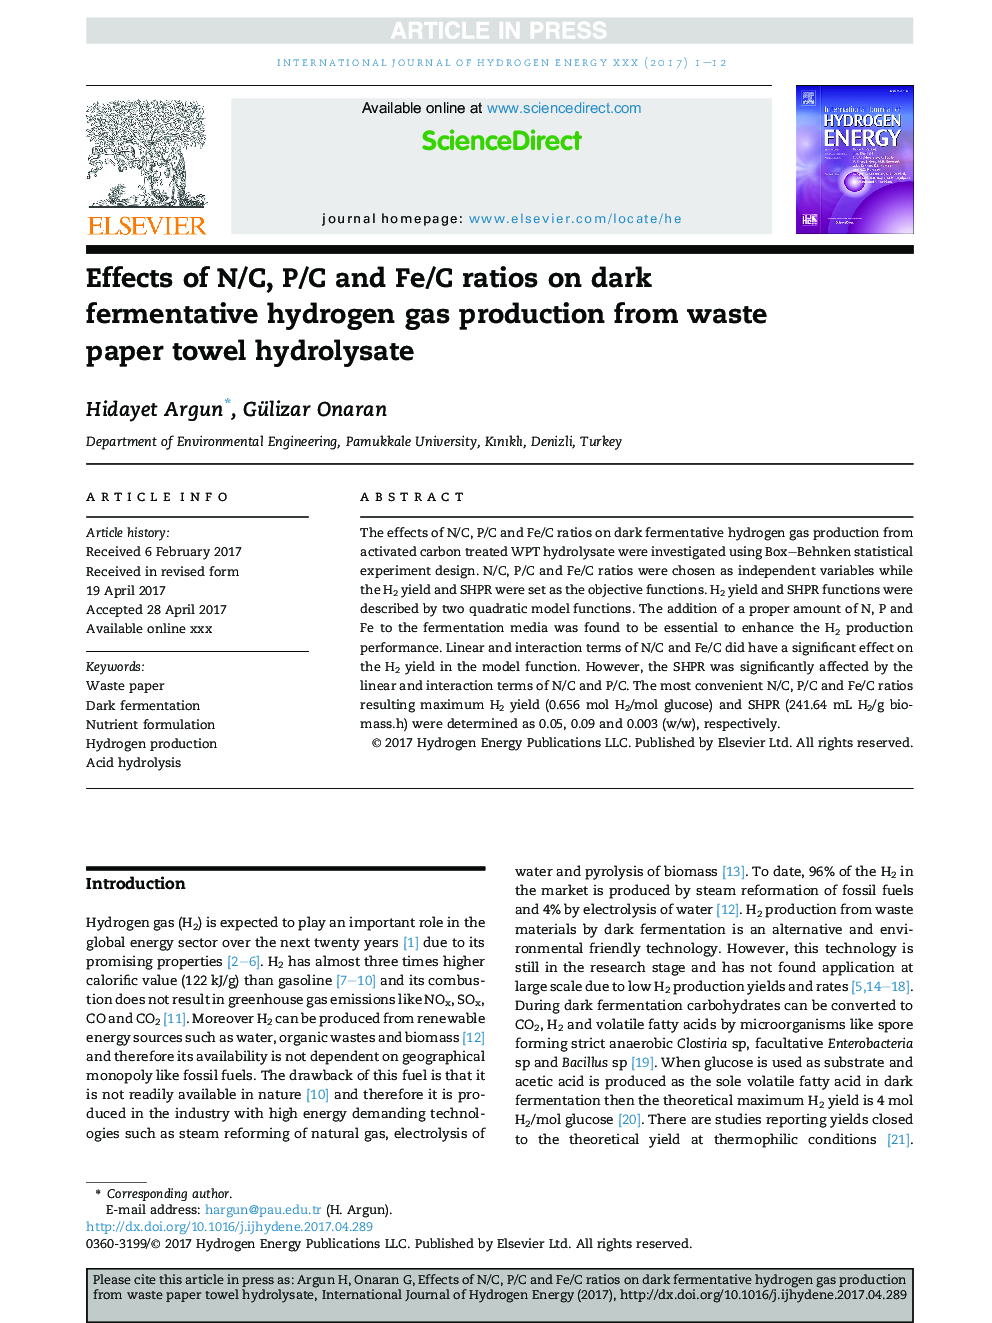 Effects of N/C, P/C and Fe/C ratios on dark fermentative hydrogen gas production from waste paper towel hydrolysate